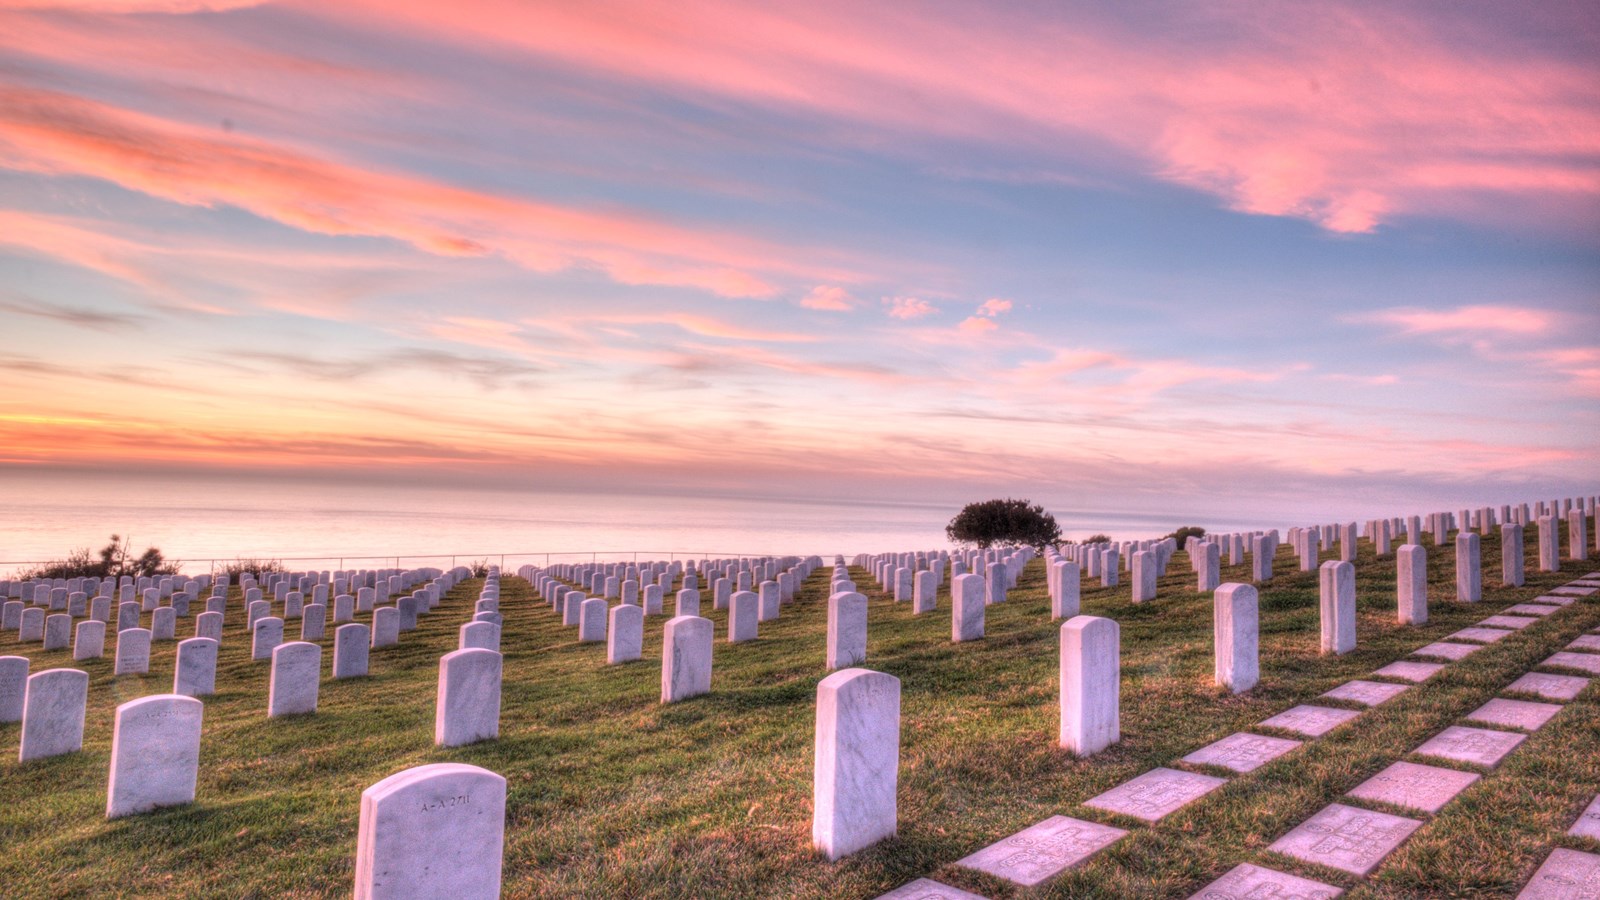 A row of gravestones in a cemetery at sunset